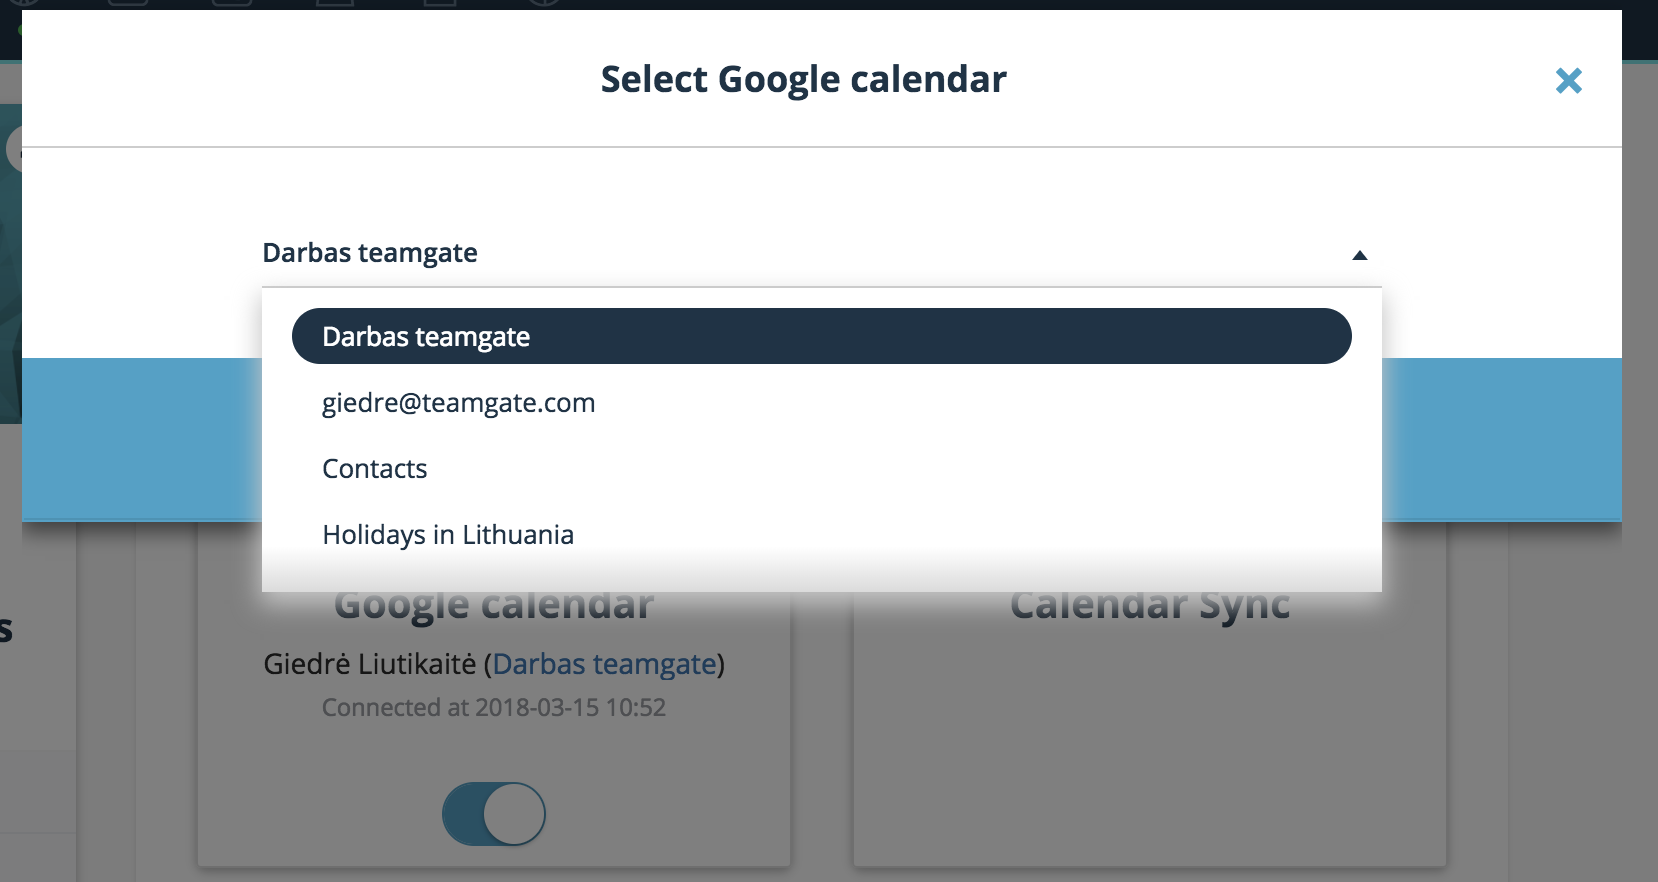 select-Google-calendar-from-the-drop-down-menu-Teamgate.png